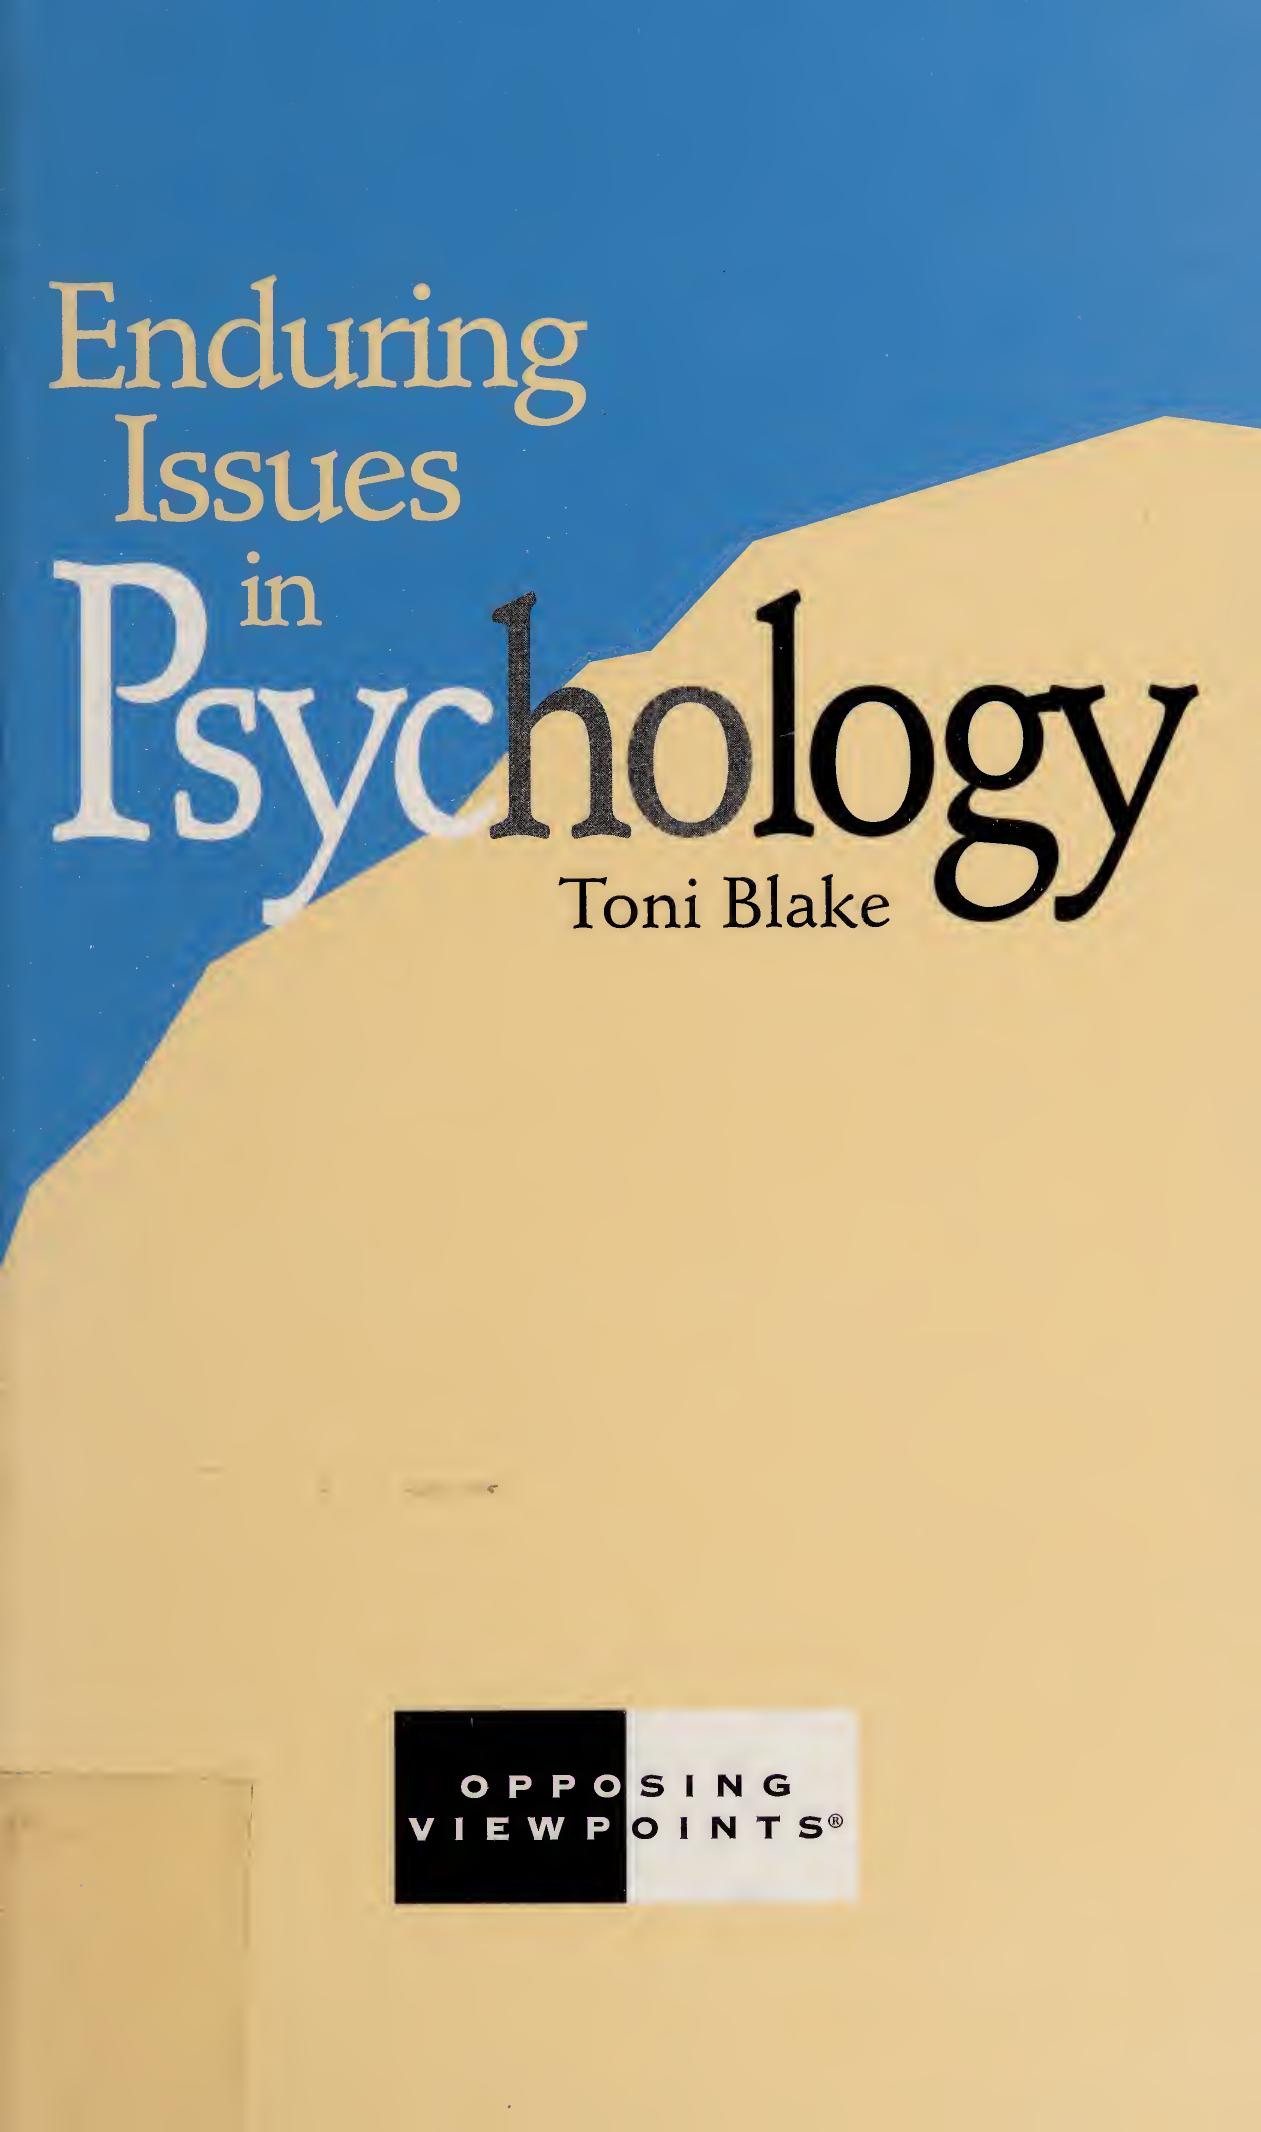 Enduring Issues in Psychology: Opposing Viewpoints